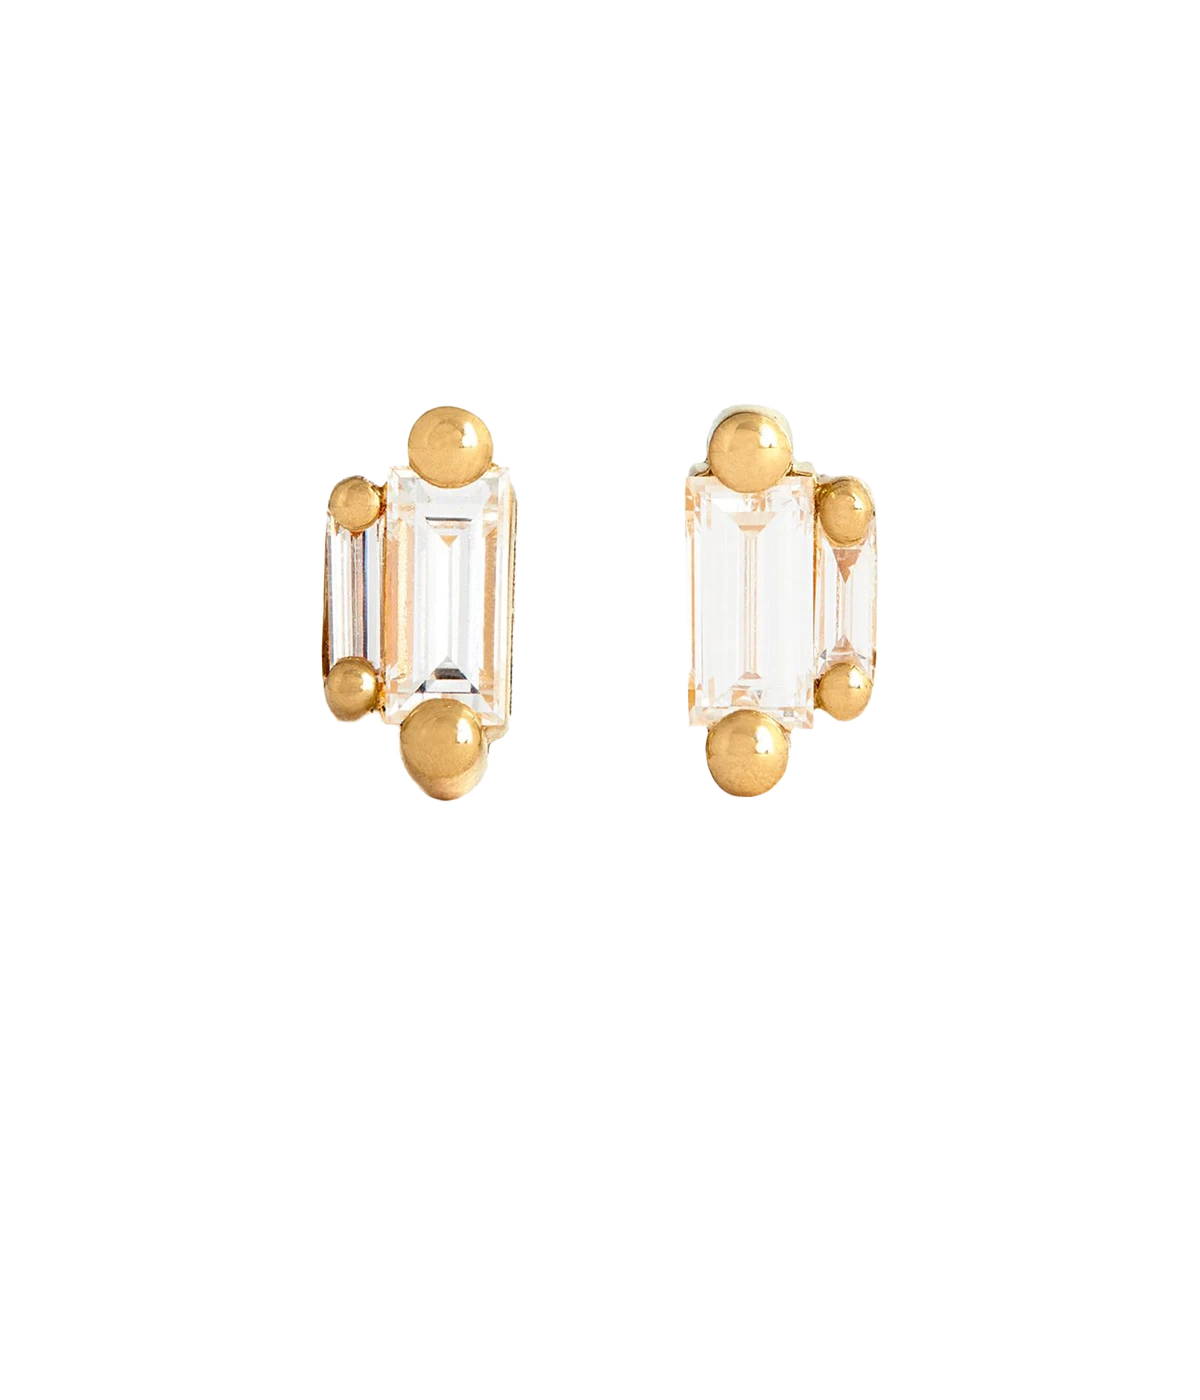 Amalfi Double Stack Studs in 14K Yellow Gold & White Topaz